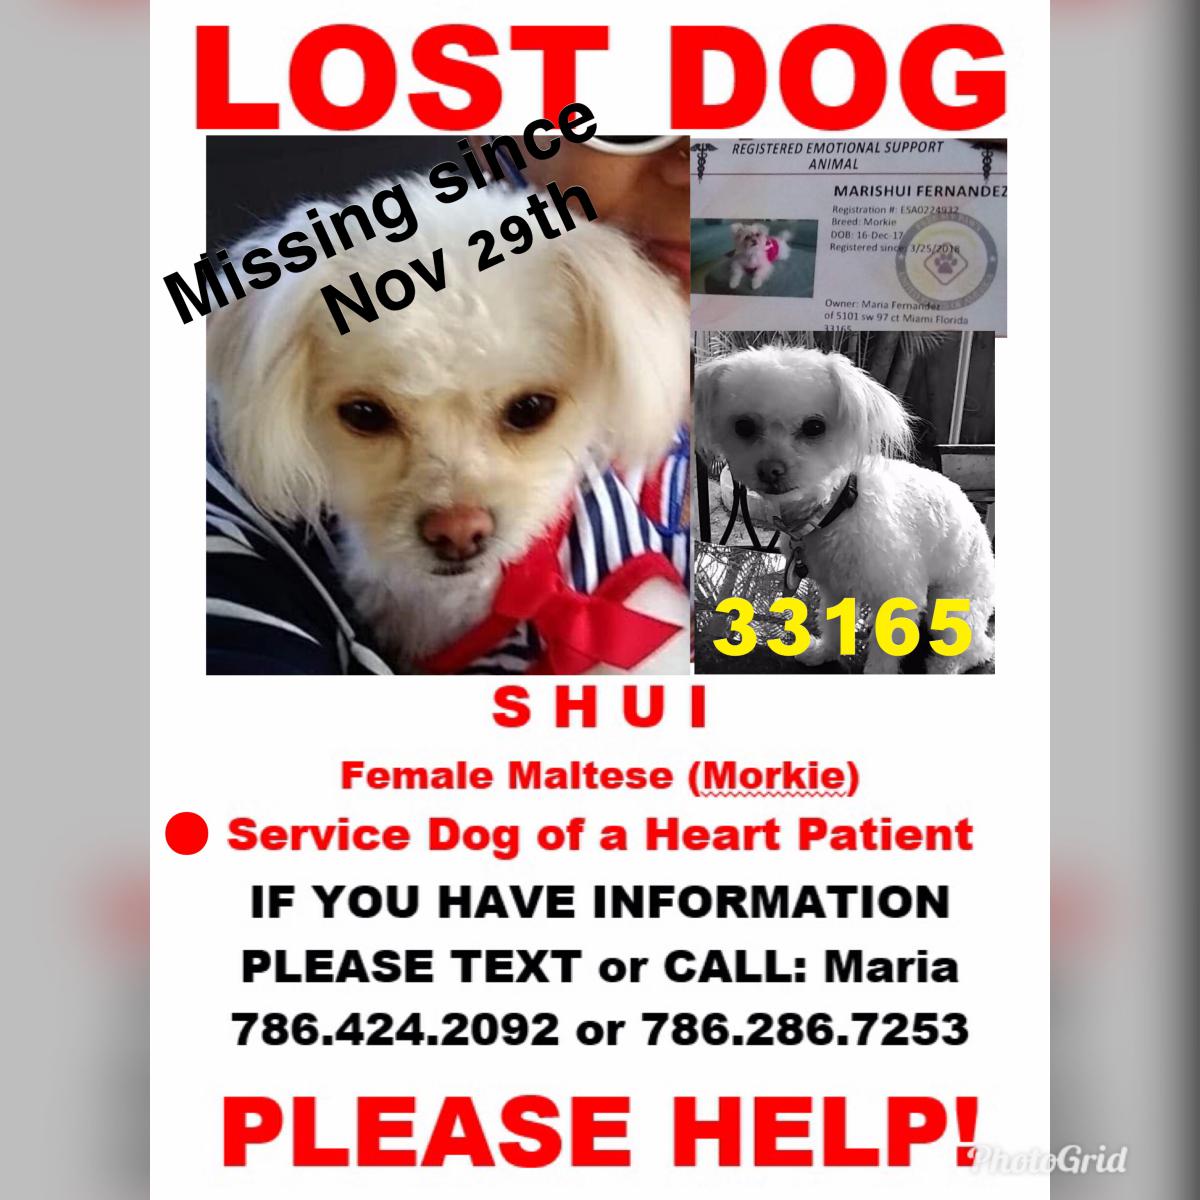 Image of Shui, Lost Dog